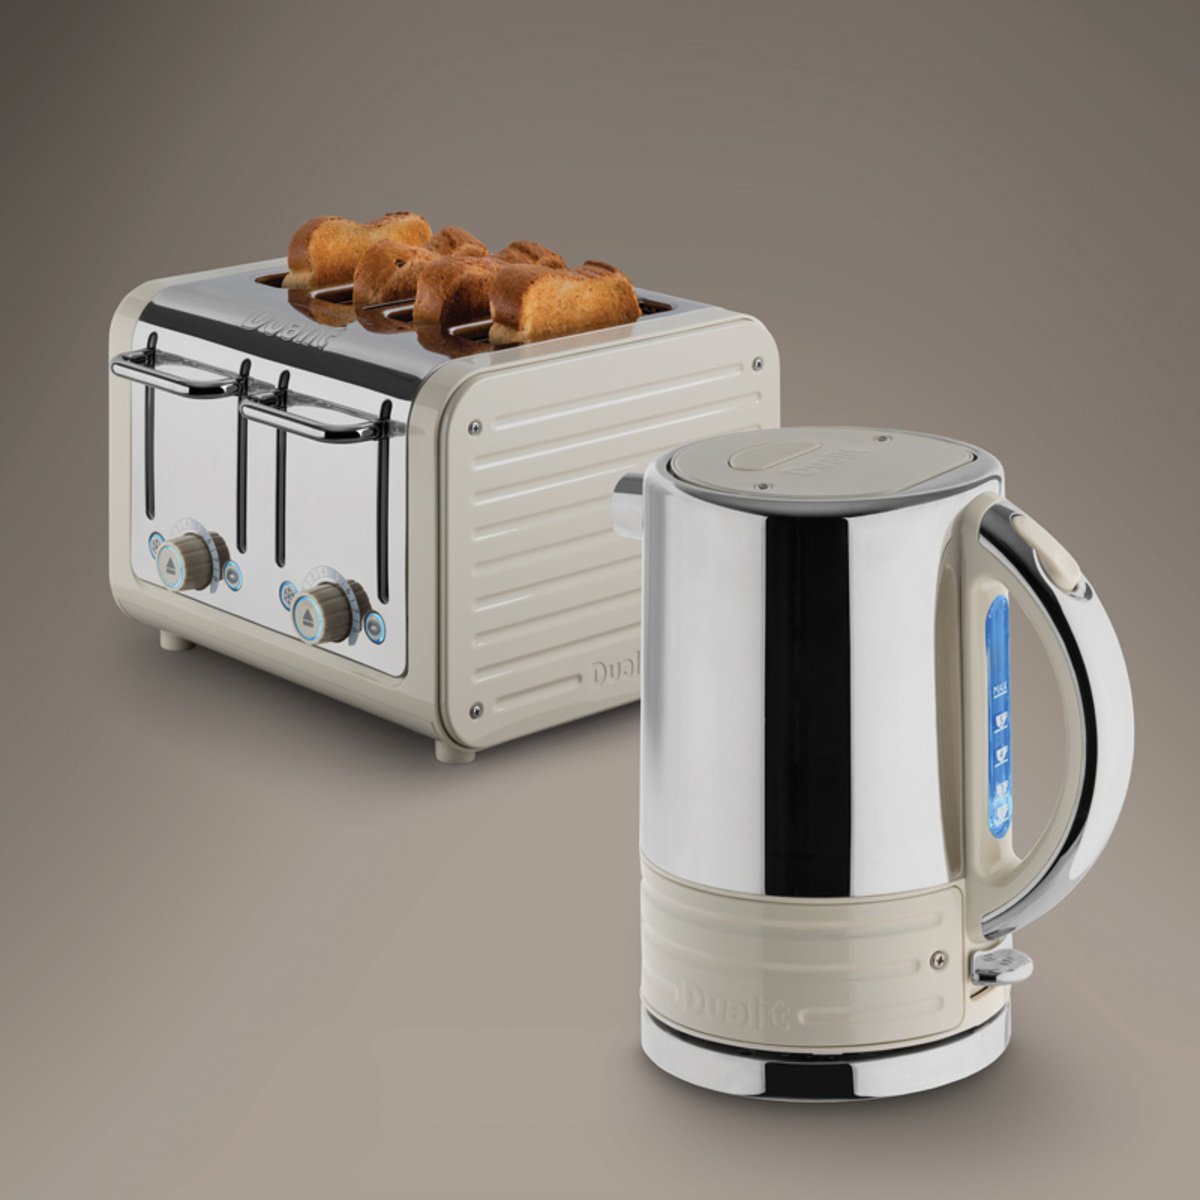 Dualit Architect Kettle and Toaster Set in Oyster White - Signature Retail Stores